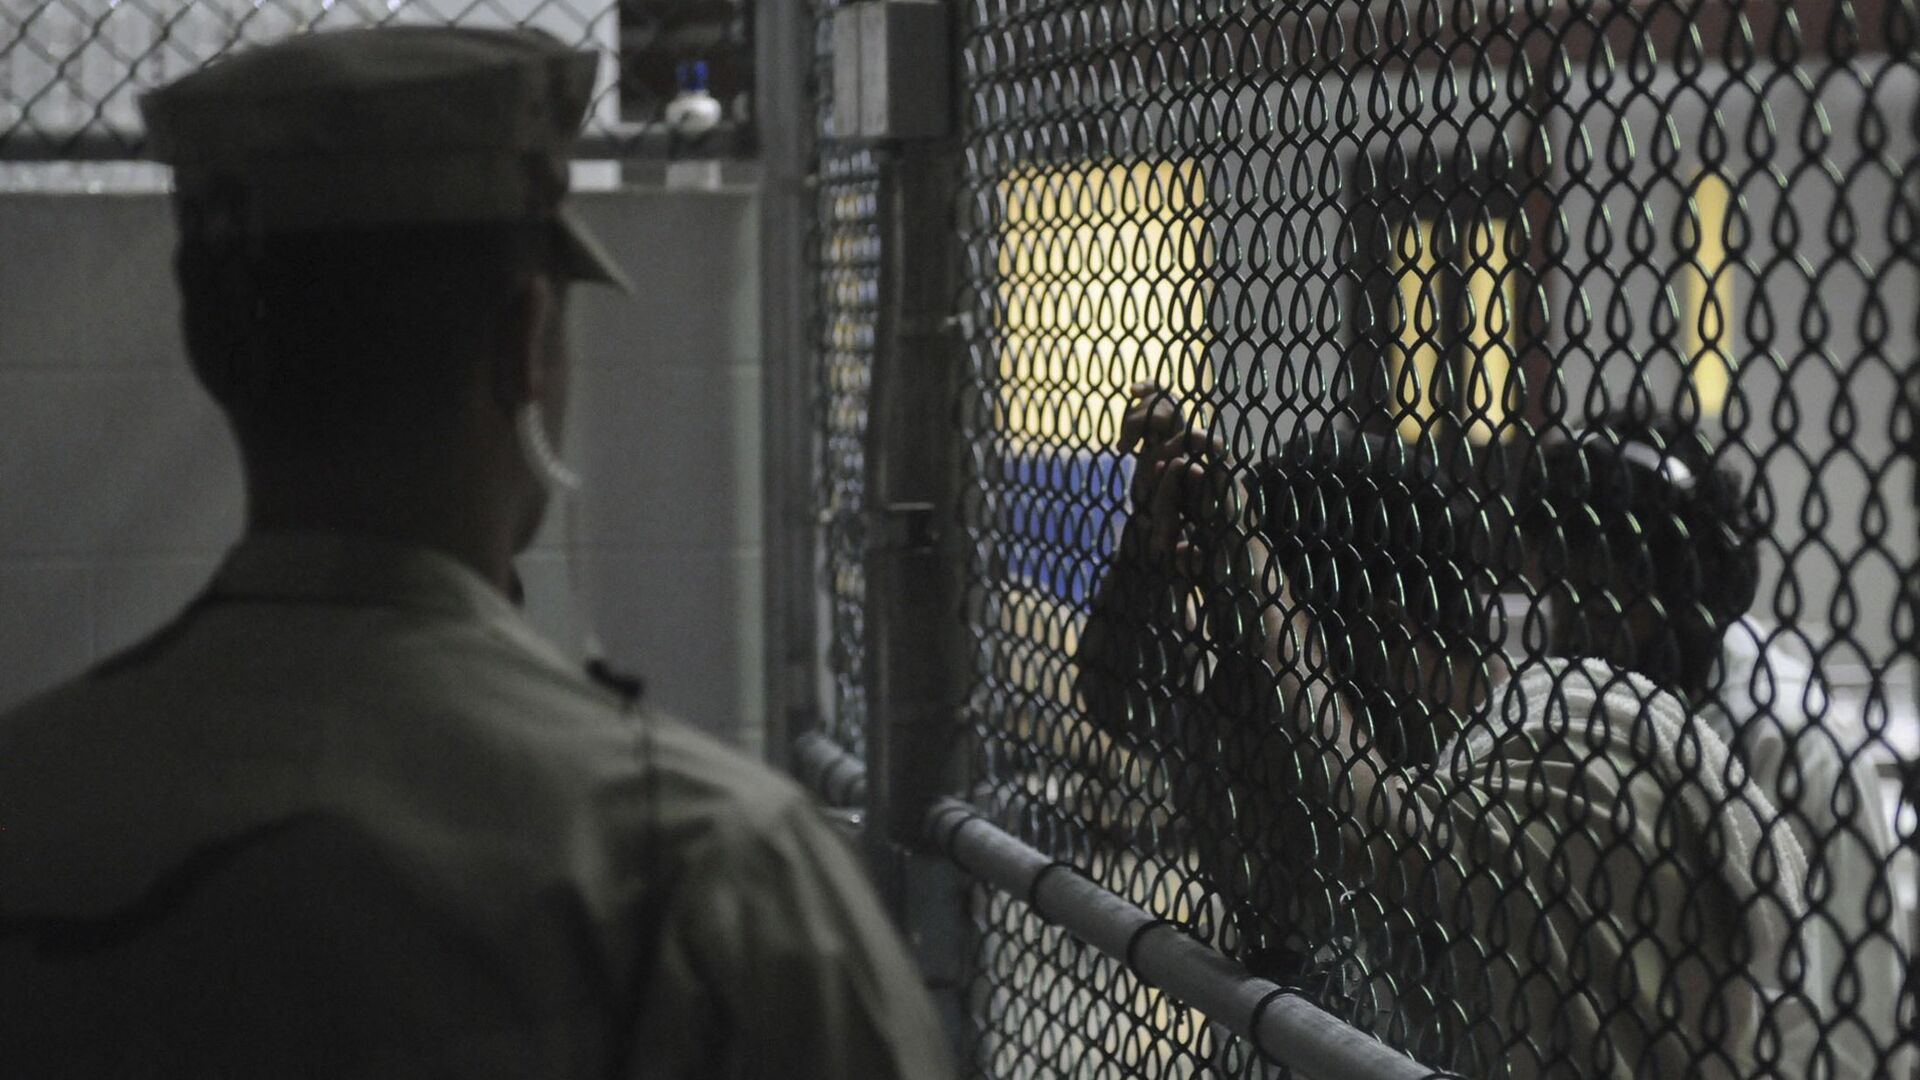 A Sailor assigned to the Navy Expeditionary Guard Battalion stands watch over detainees in a cell block in Camp 6 at Guantanamo Bay naval base in a March 30, 2010 file photo provided by the US Navy. - Sputnik Mundo, 1920, 12.01.2022